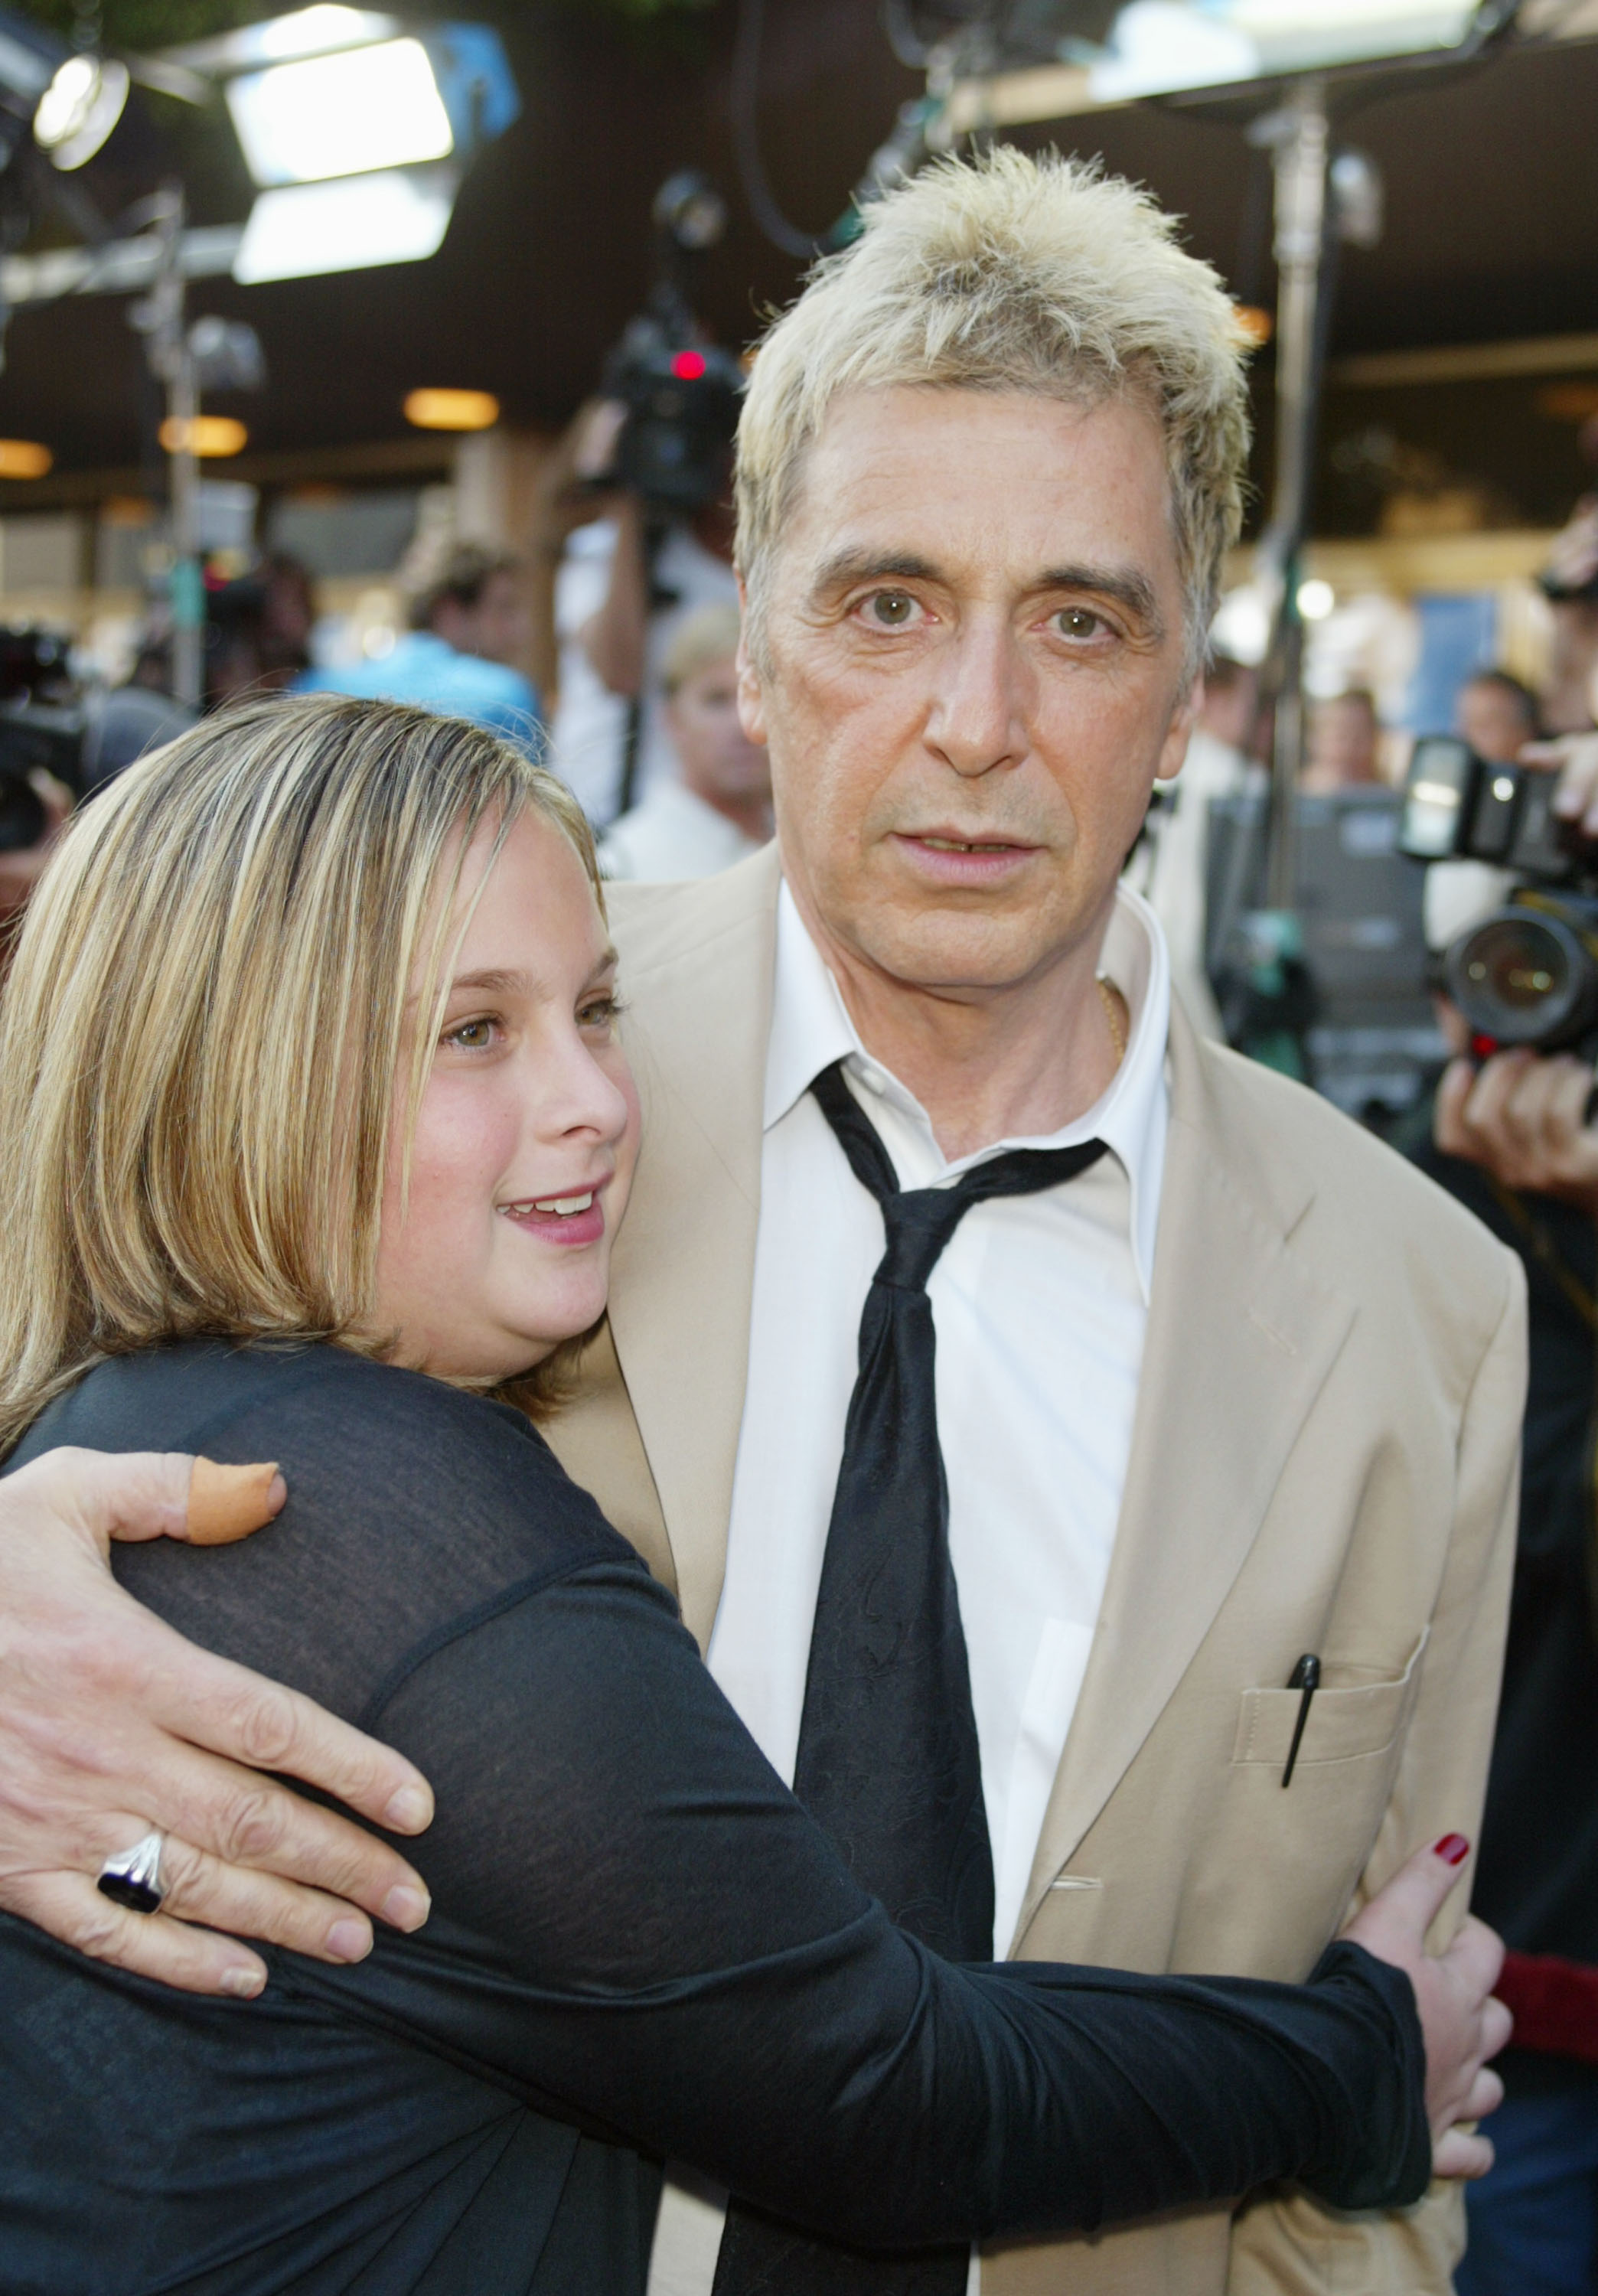 Al Pacino and his daughter Julie at the premiere of "Simone" at the Mann National Theater and after-party at Napa Vally restaurant in Westwood, Ca. Tuesday, August 13, 2002 | Source: Getty Images